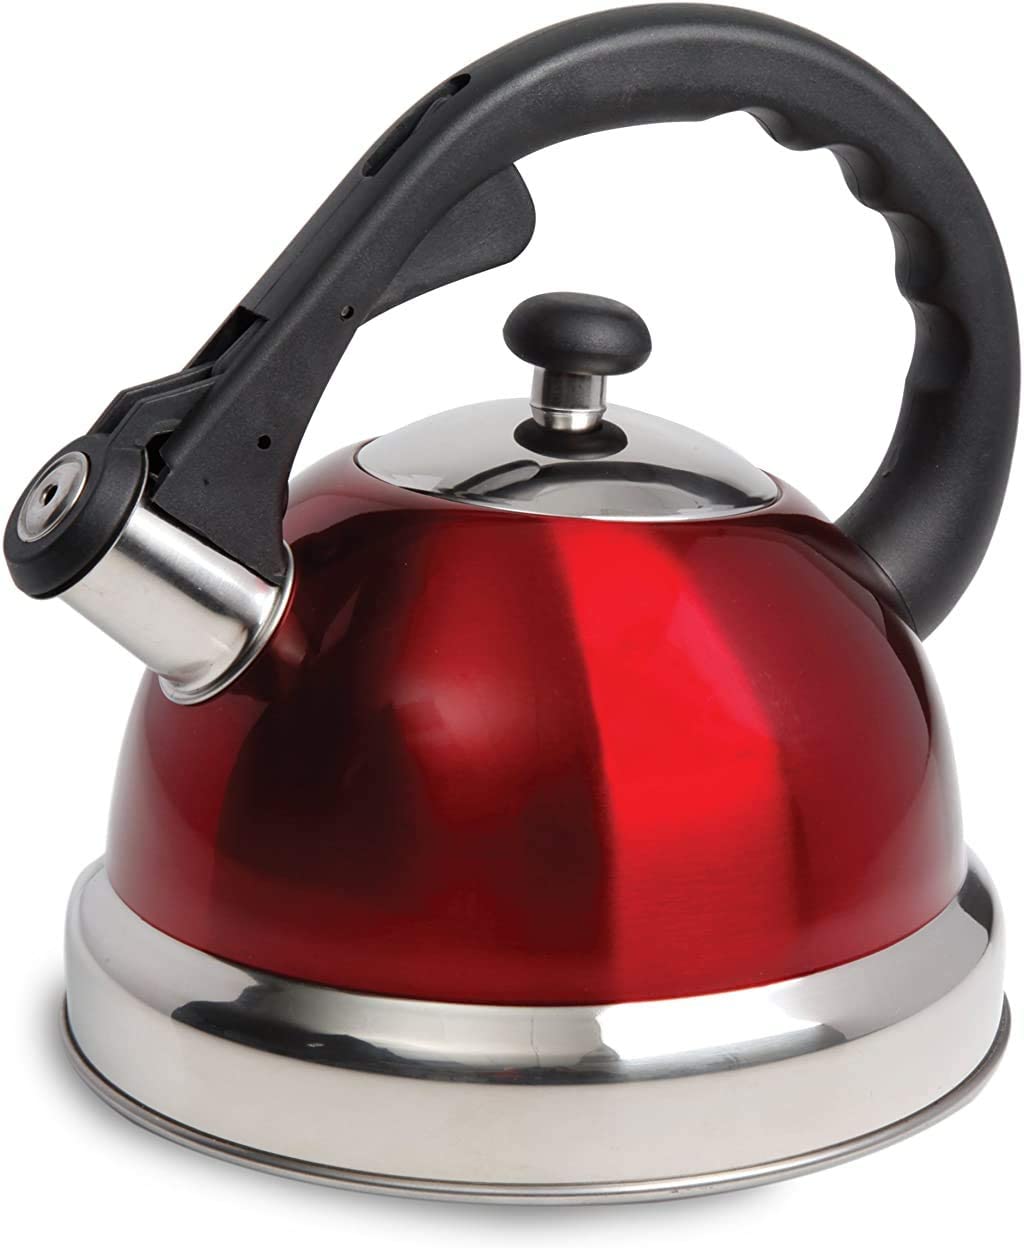 Mr Coffee Claredale Stainless Steel Whistling Tea Kettle, 2.2 Quarts, Red